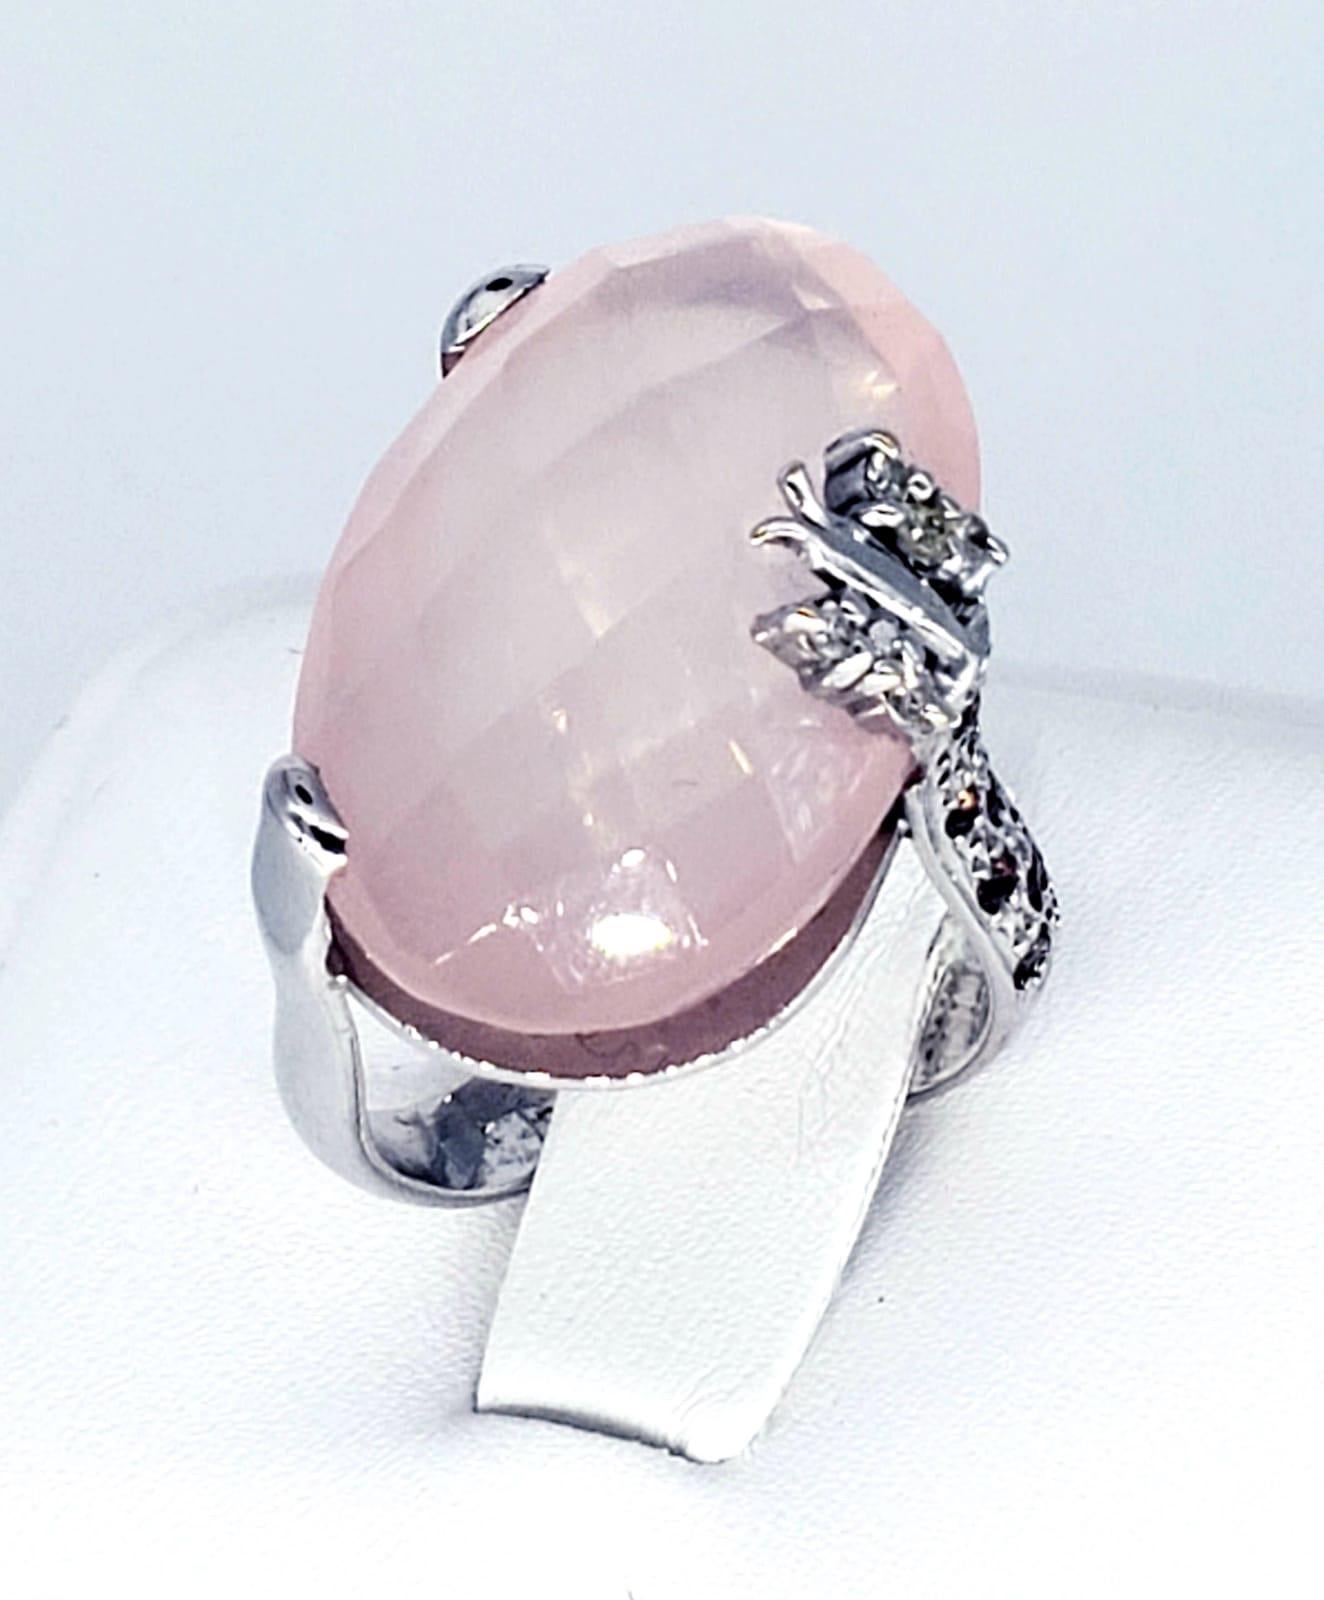 Modern 16.78 Carat Rose & Diamonds Quartz Butterfly Cocktail Ring 18k White Gold. The ring features a beautiful work of art by Brazilian jewelry designer Patricia Dias. The rose quartz stone is nicknamed “The stone of love” and measures